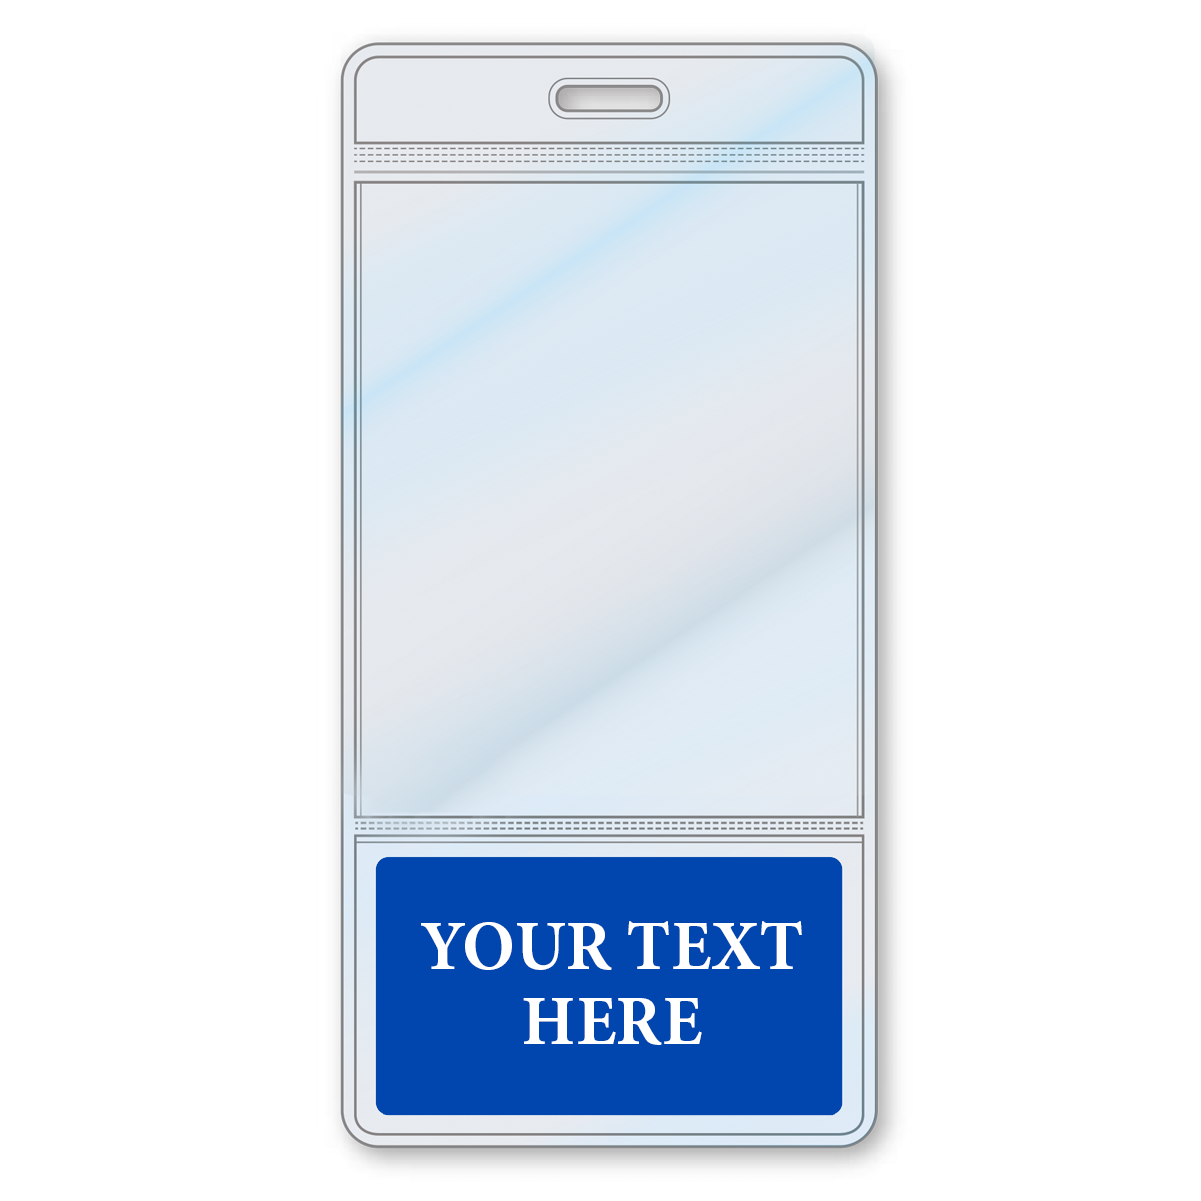 A customizable badge holder featuring a blank ID badge with a clear plastic top section and a blue bottom section labeled "YOUR TEXT HERE." Ideal for any role identifying Custom Printed BadgeBottoms® Vertical (Badge Holder & Badge Buddy IN ONE!!) needs.